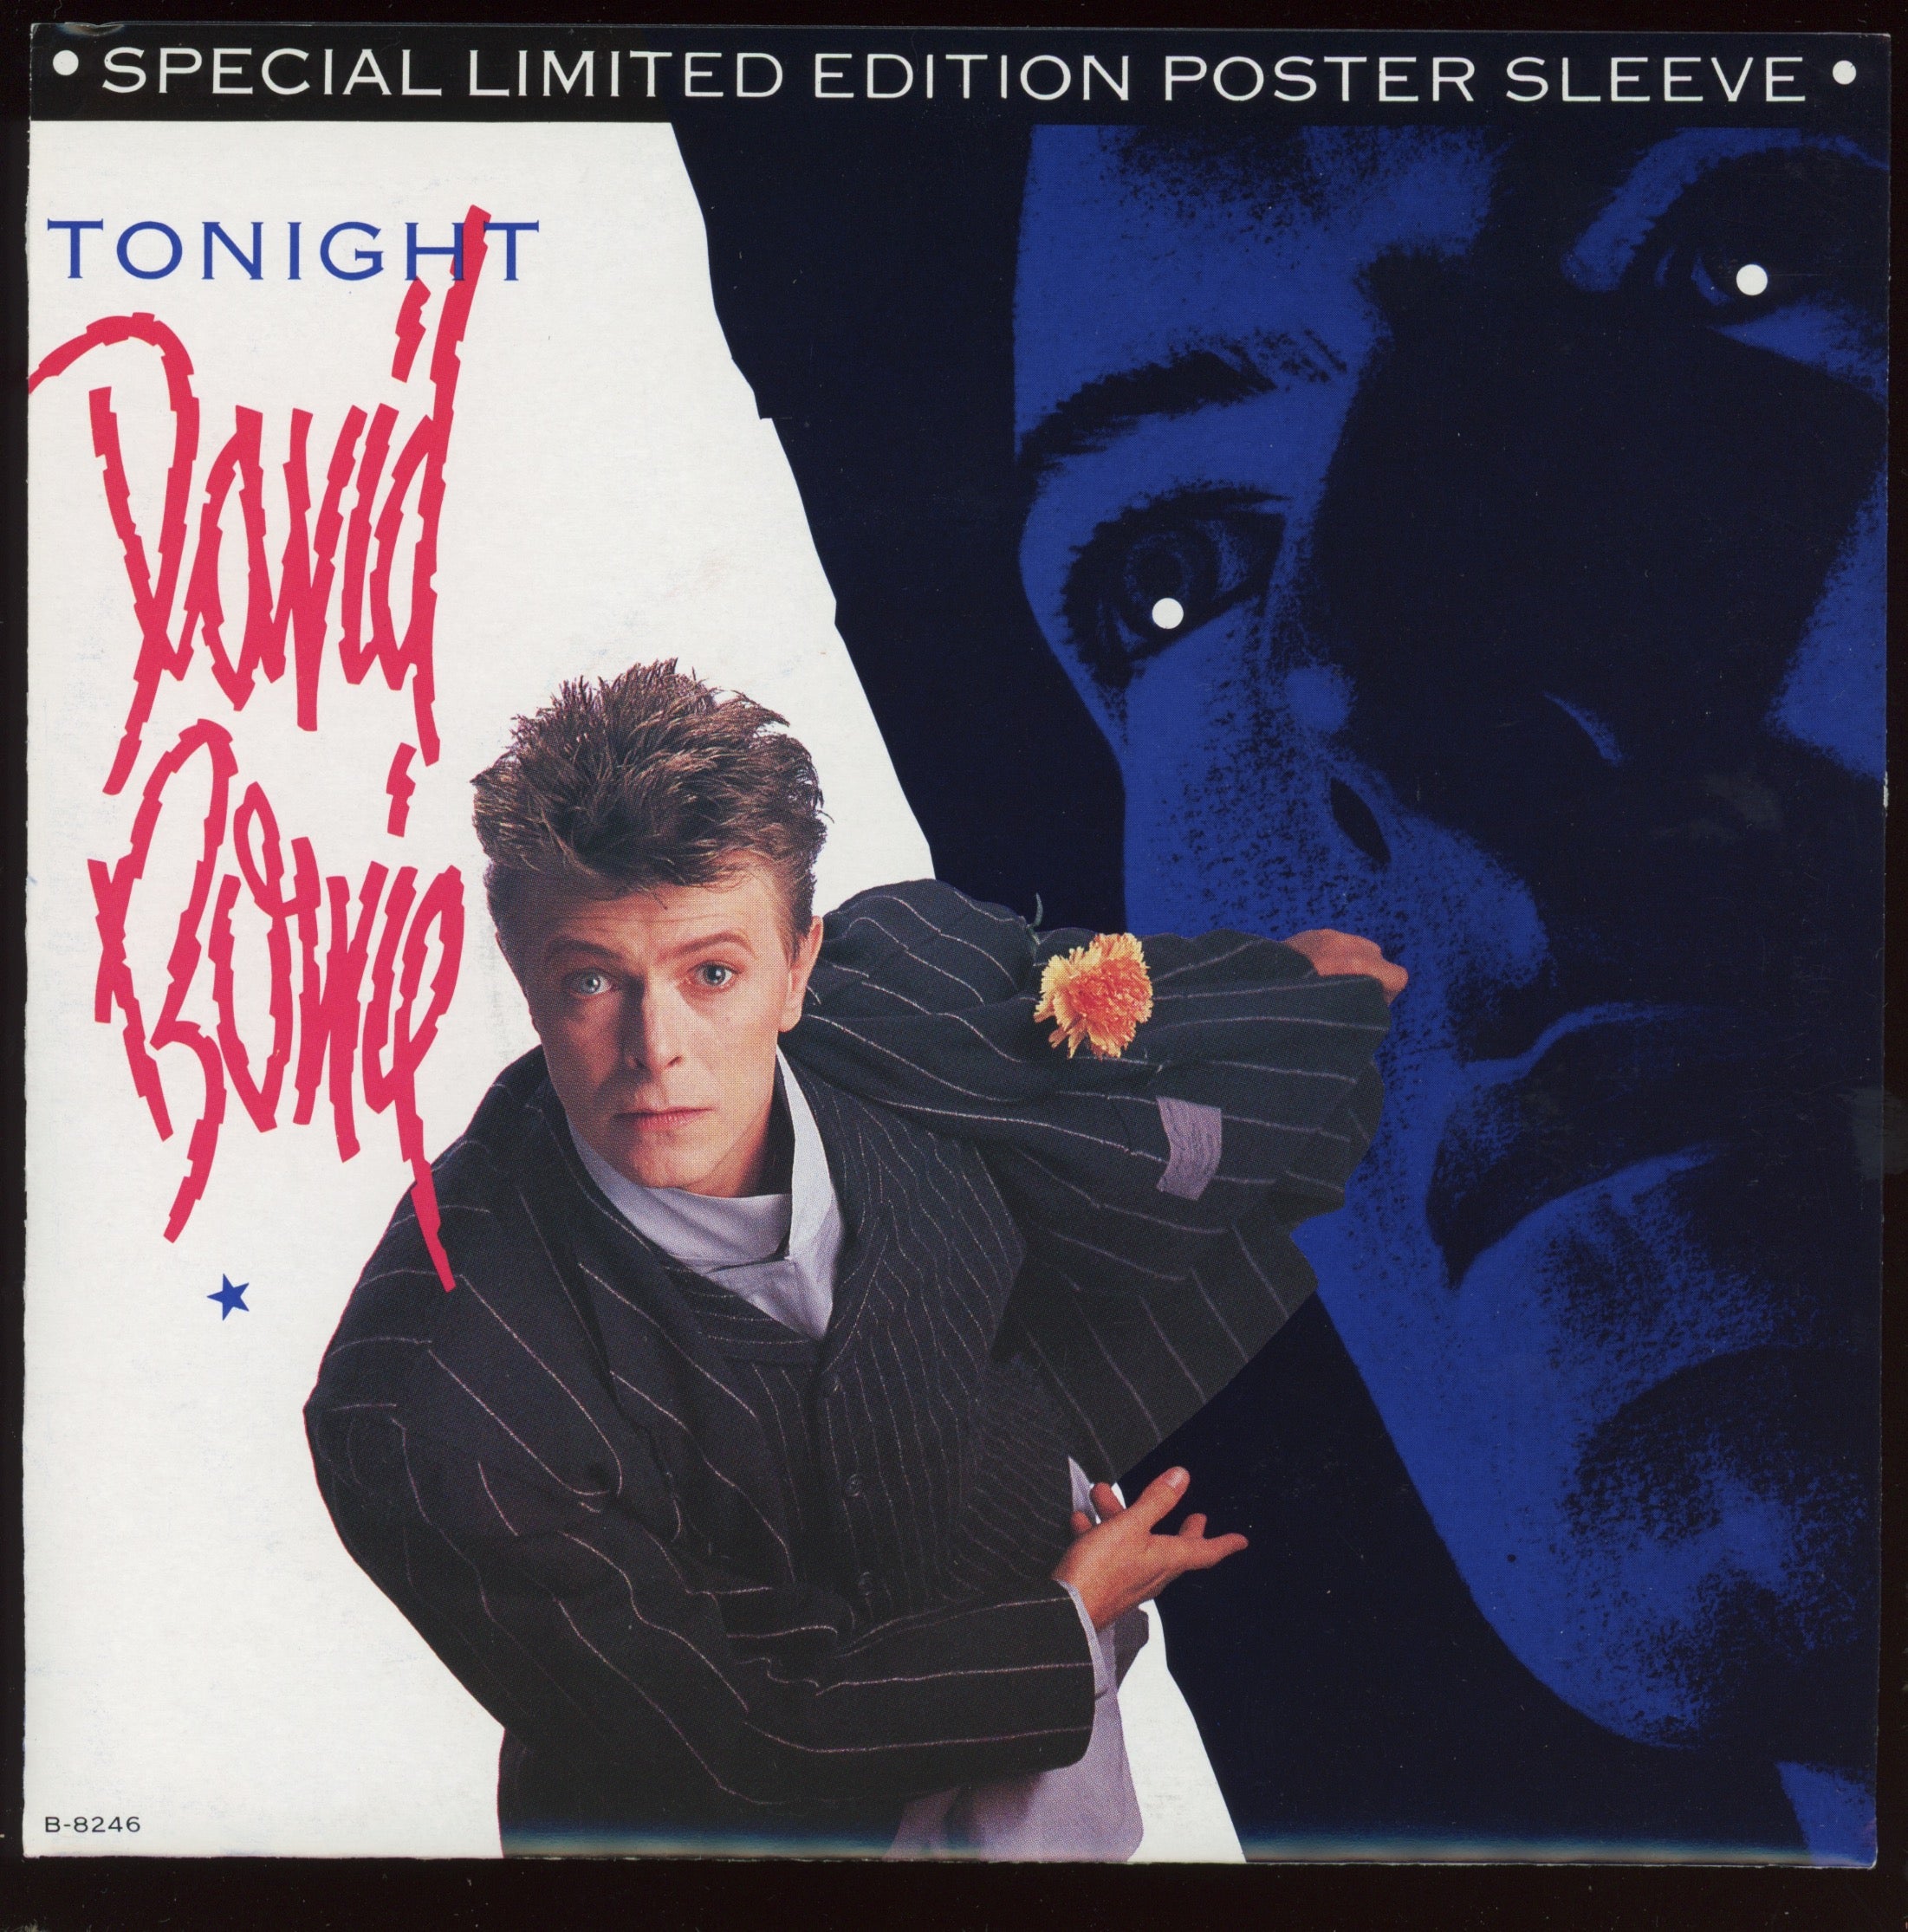 David Bowie - Tonight on EMI America With Poster Sleeve